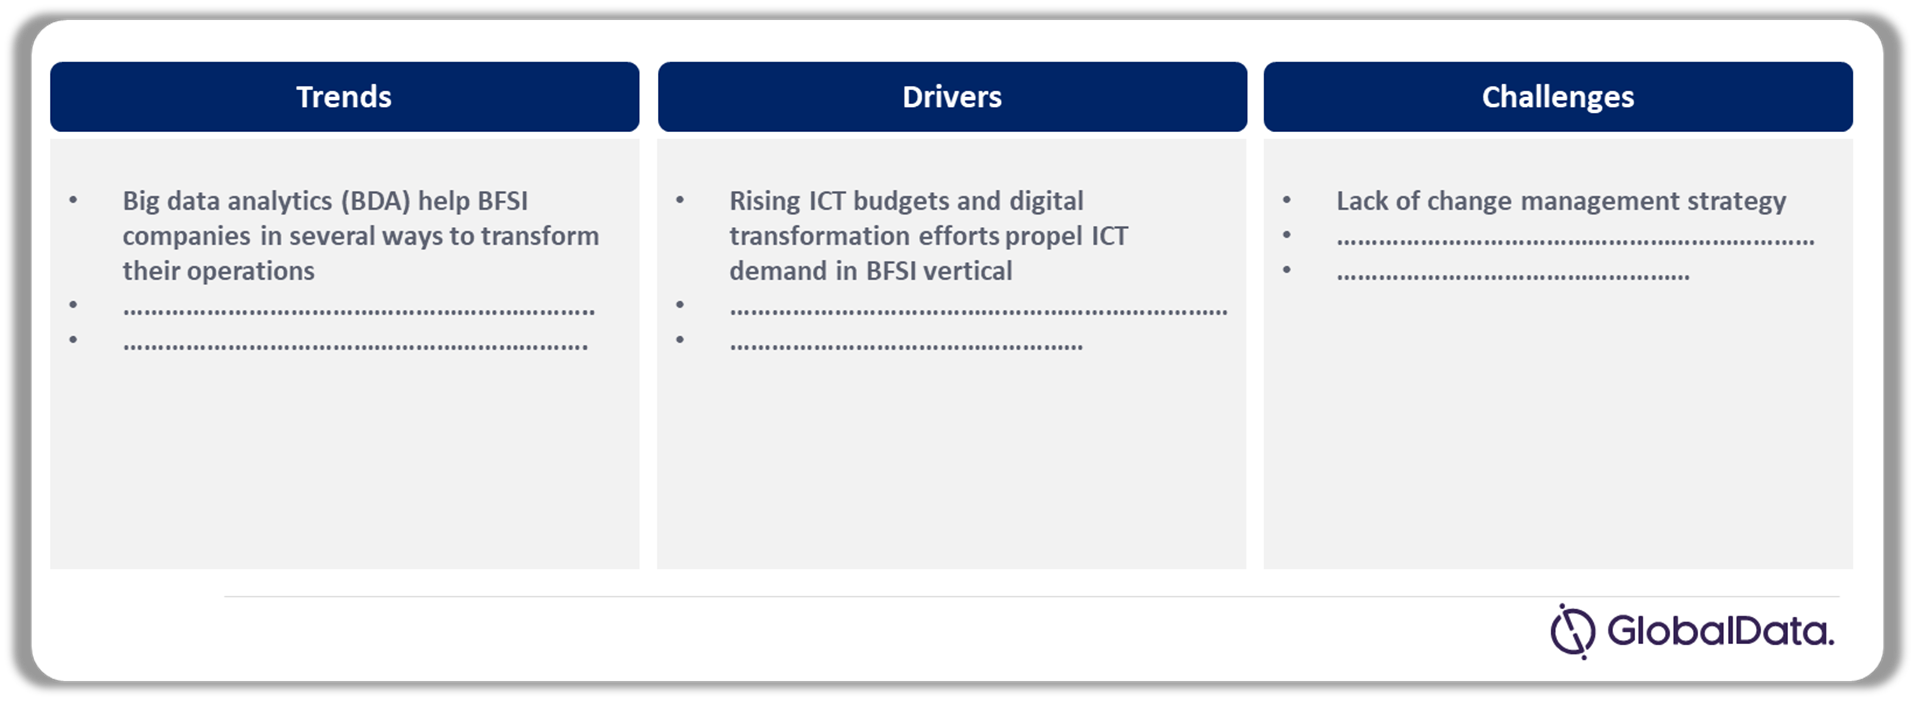 Enterprise ICT Market Dynamics in BFSI – Drivers, Trends and Challenges